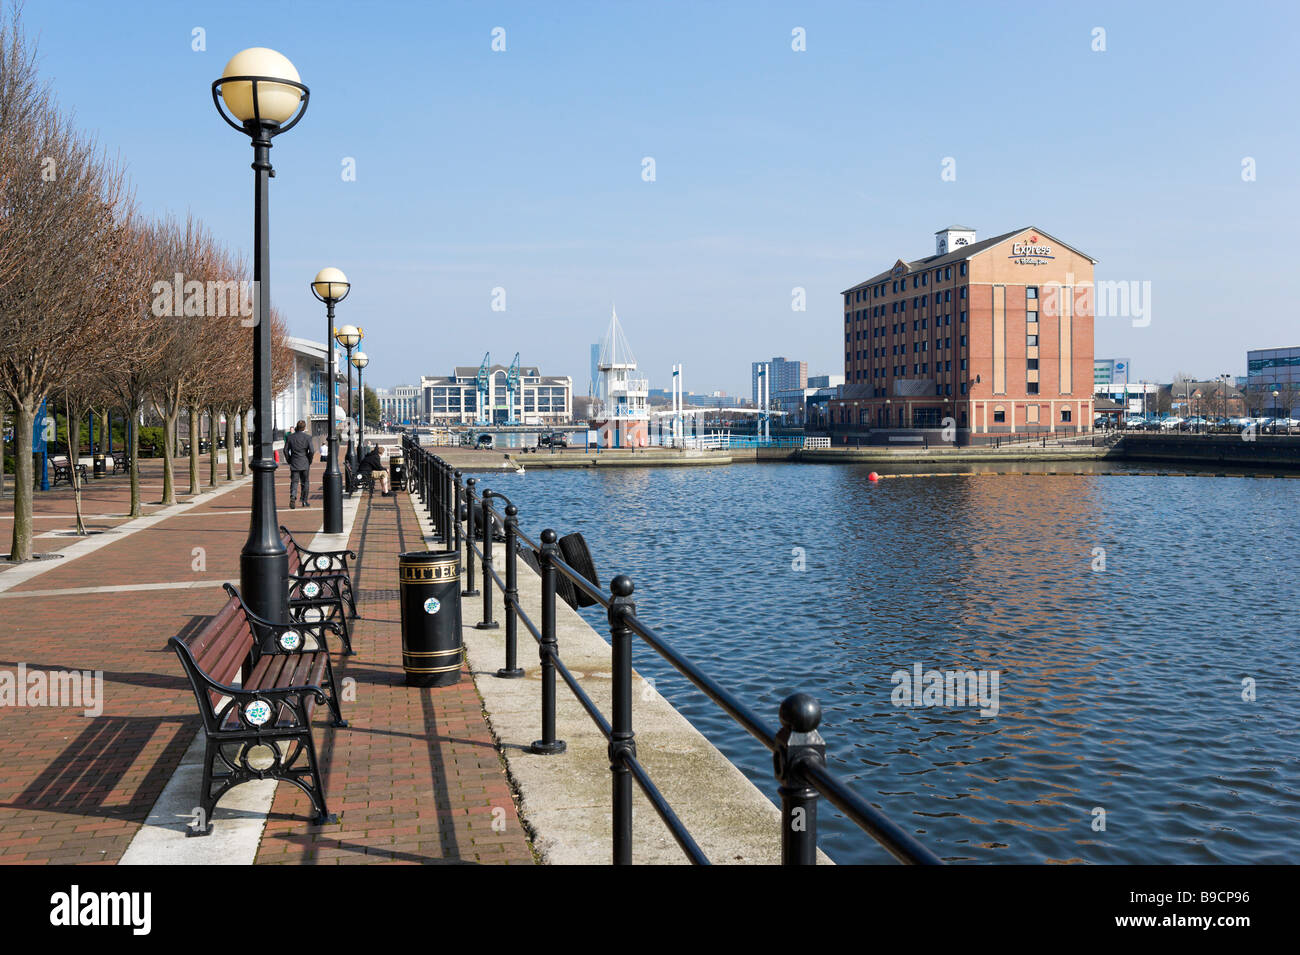 The promenade alongside the Manchester Ship Canal and the Express by Holiday Inn Hotel, Salford Quays, Greater Manchester, Engla Stock Photo